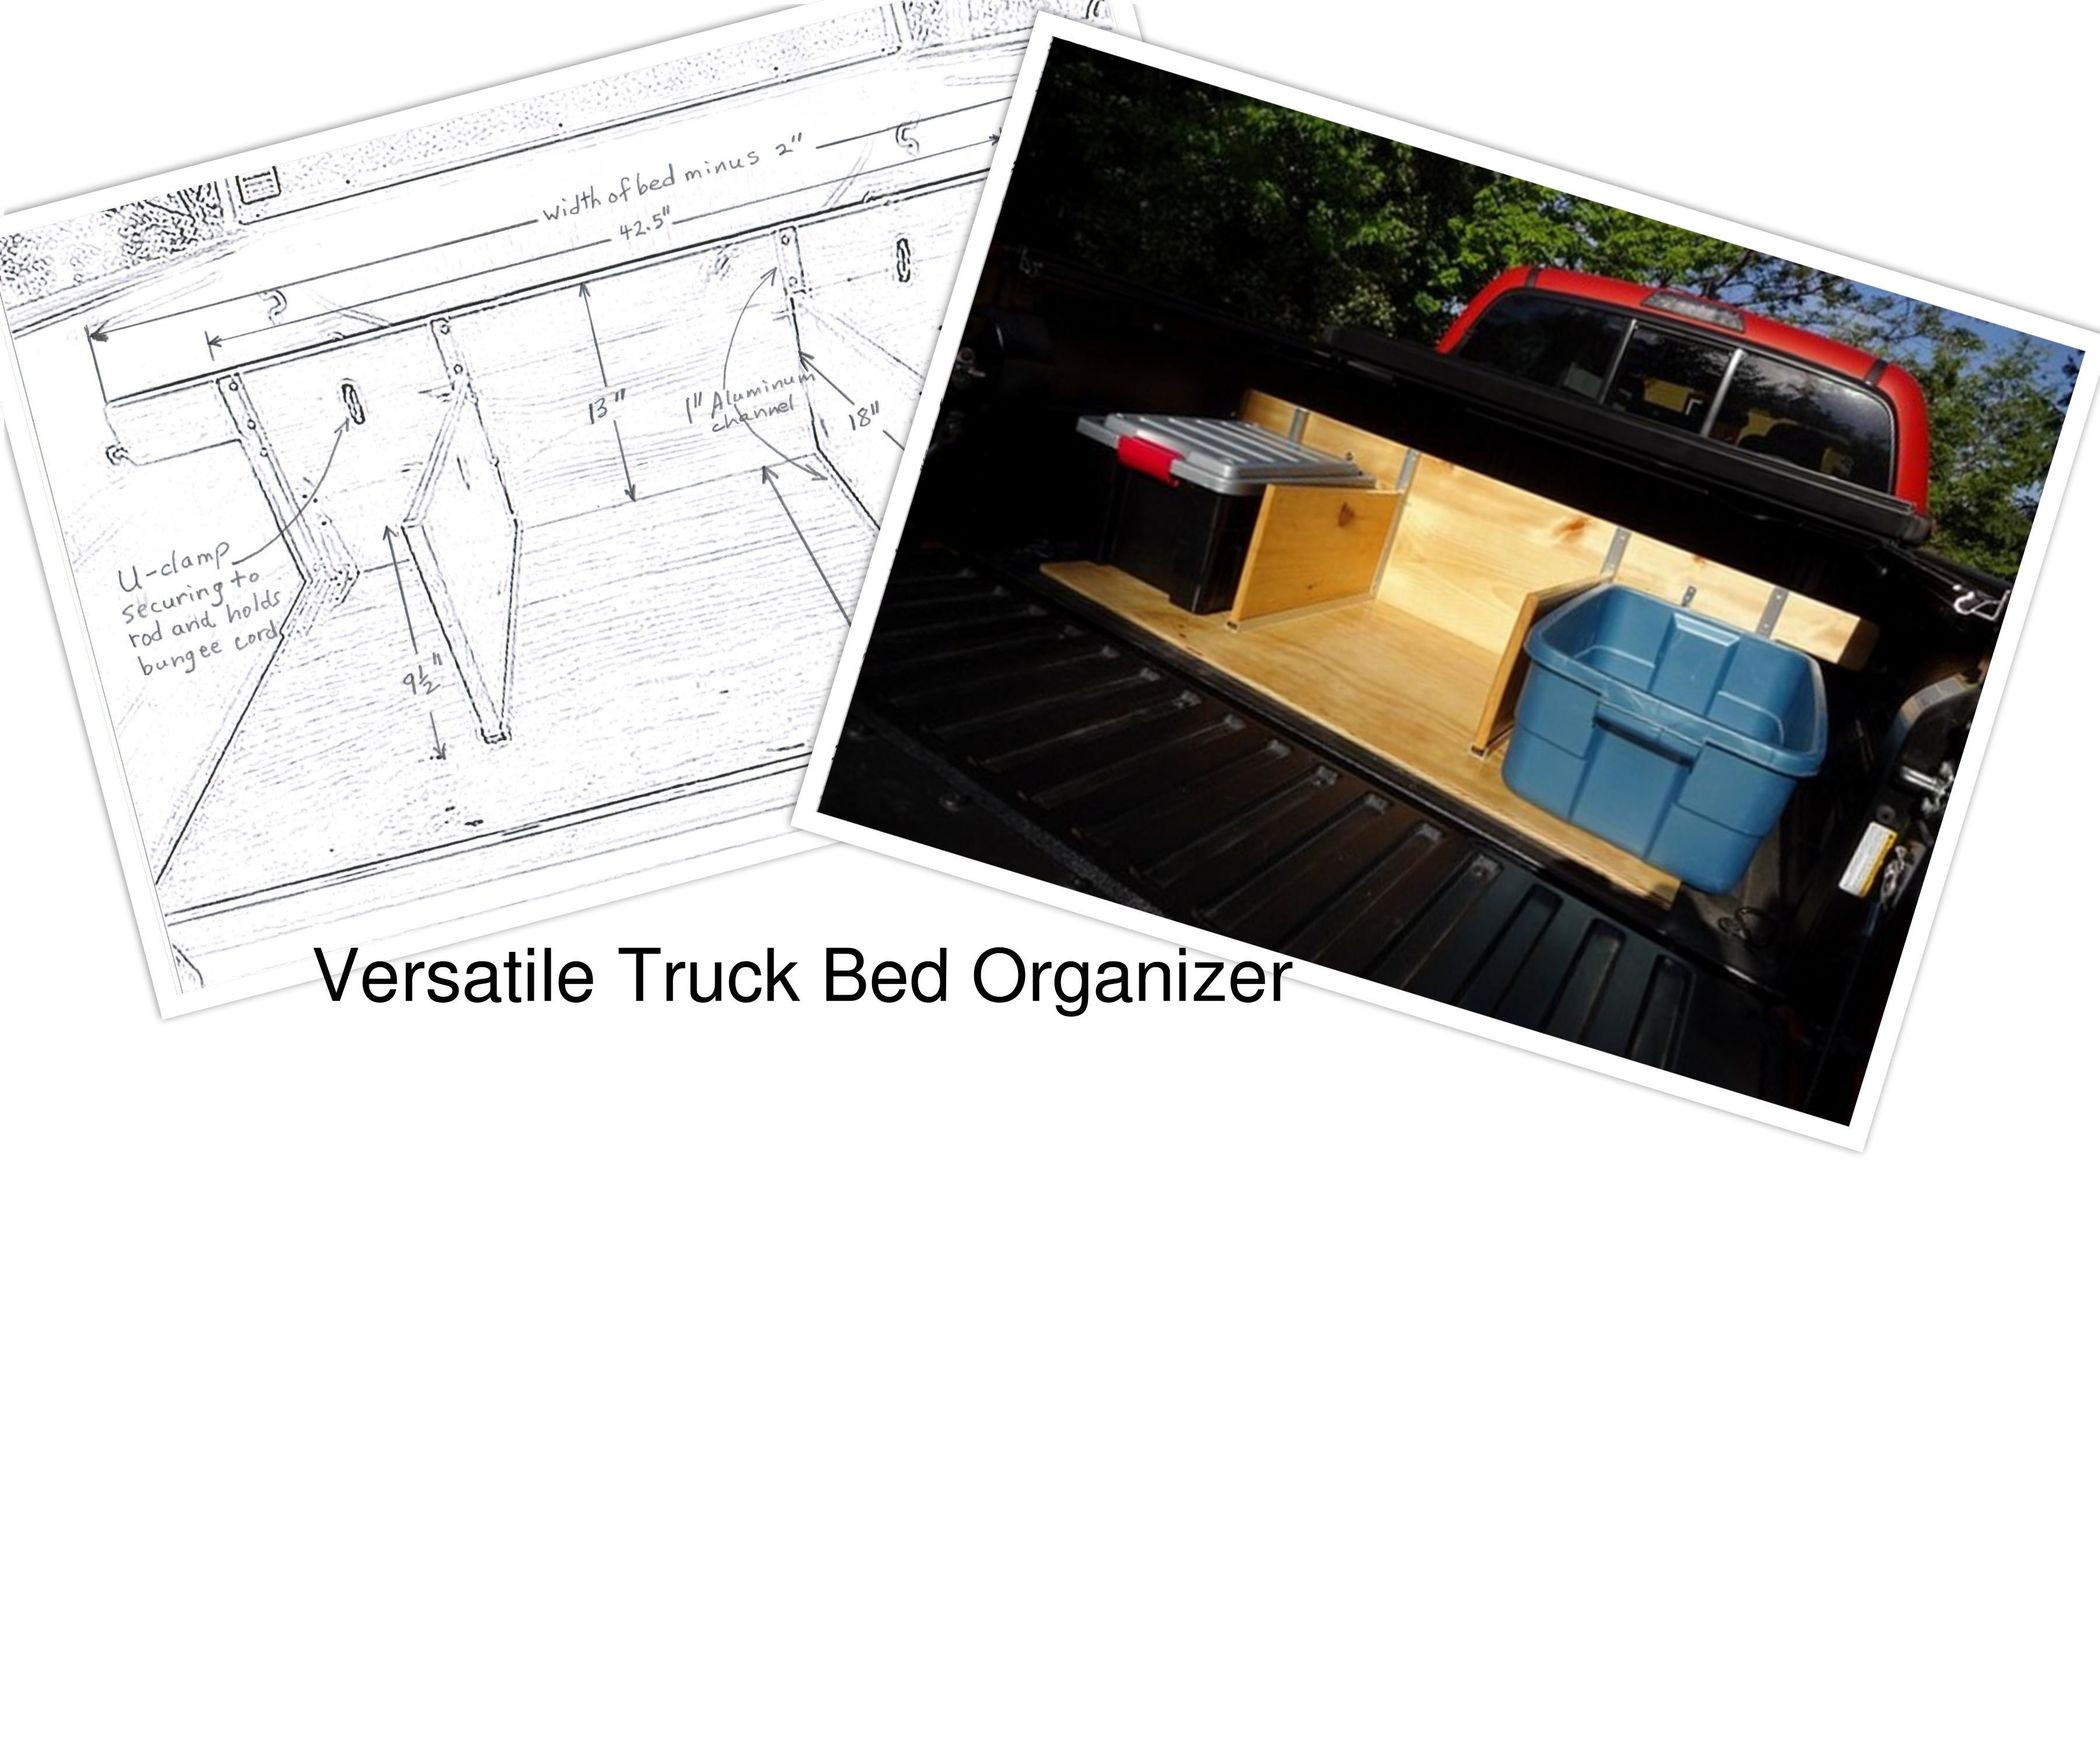 DIY Truck Bed Organizer
 How to Build a Truck Bed Organizer 4